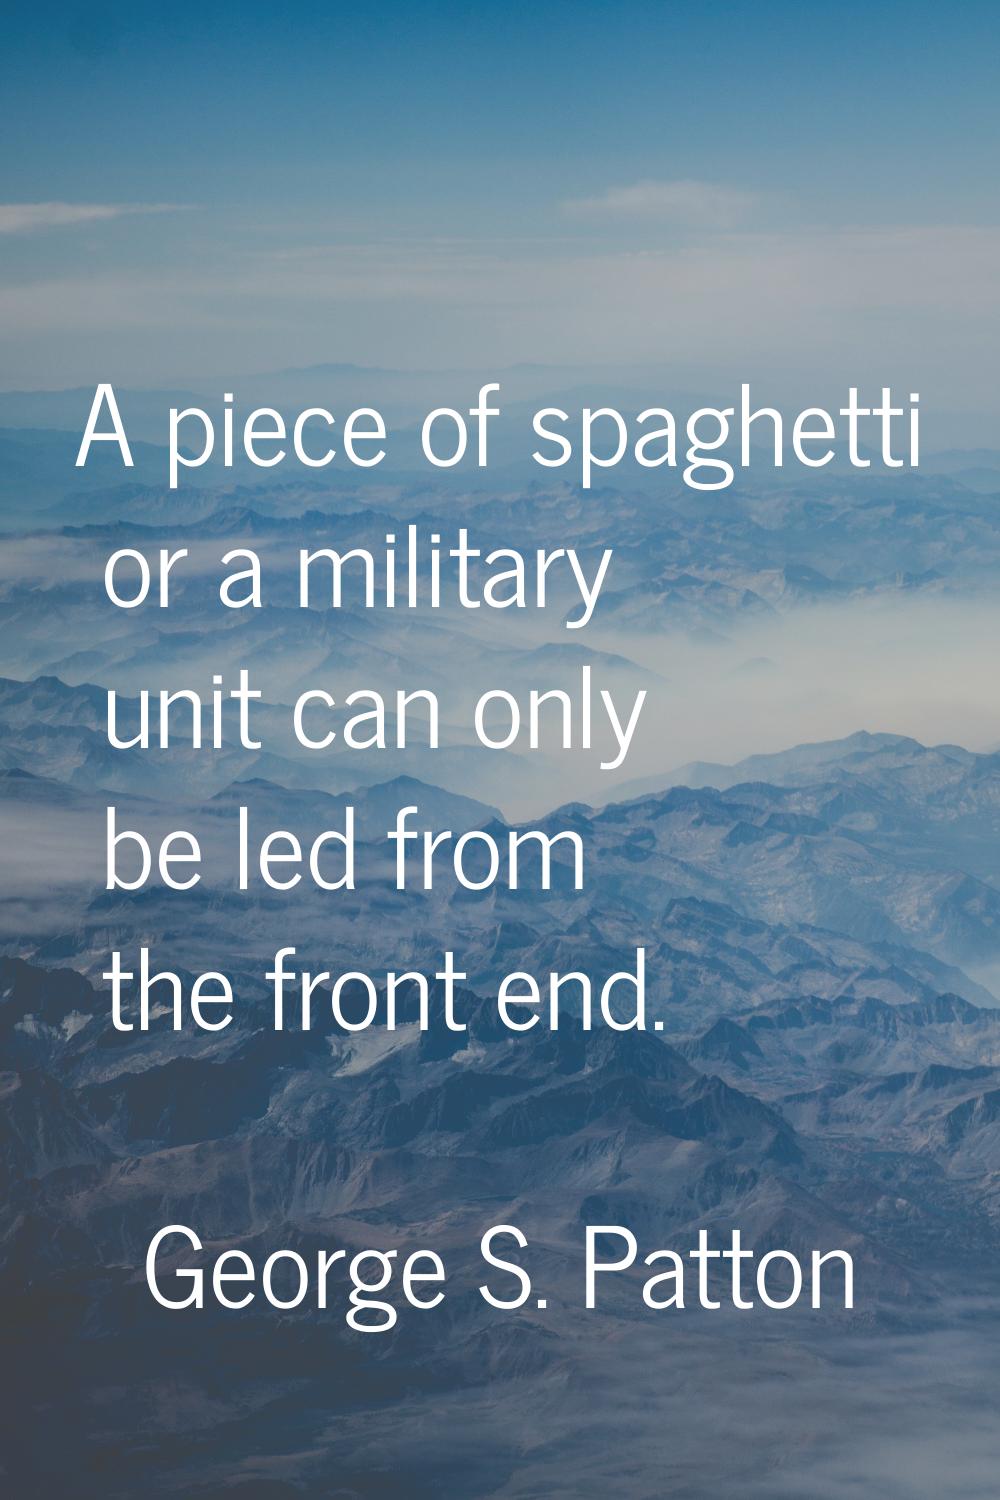 A piece of spaghetti or a military unit can only be led from the front end.